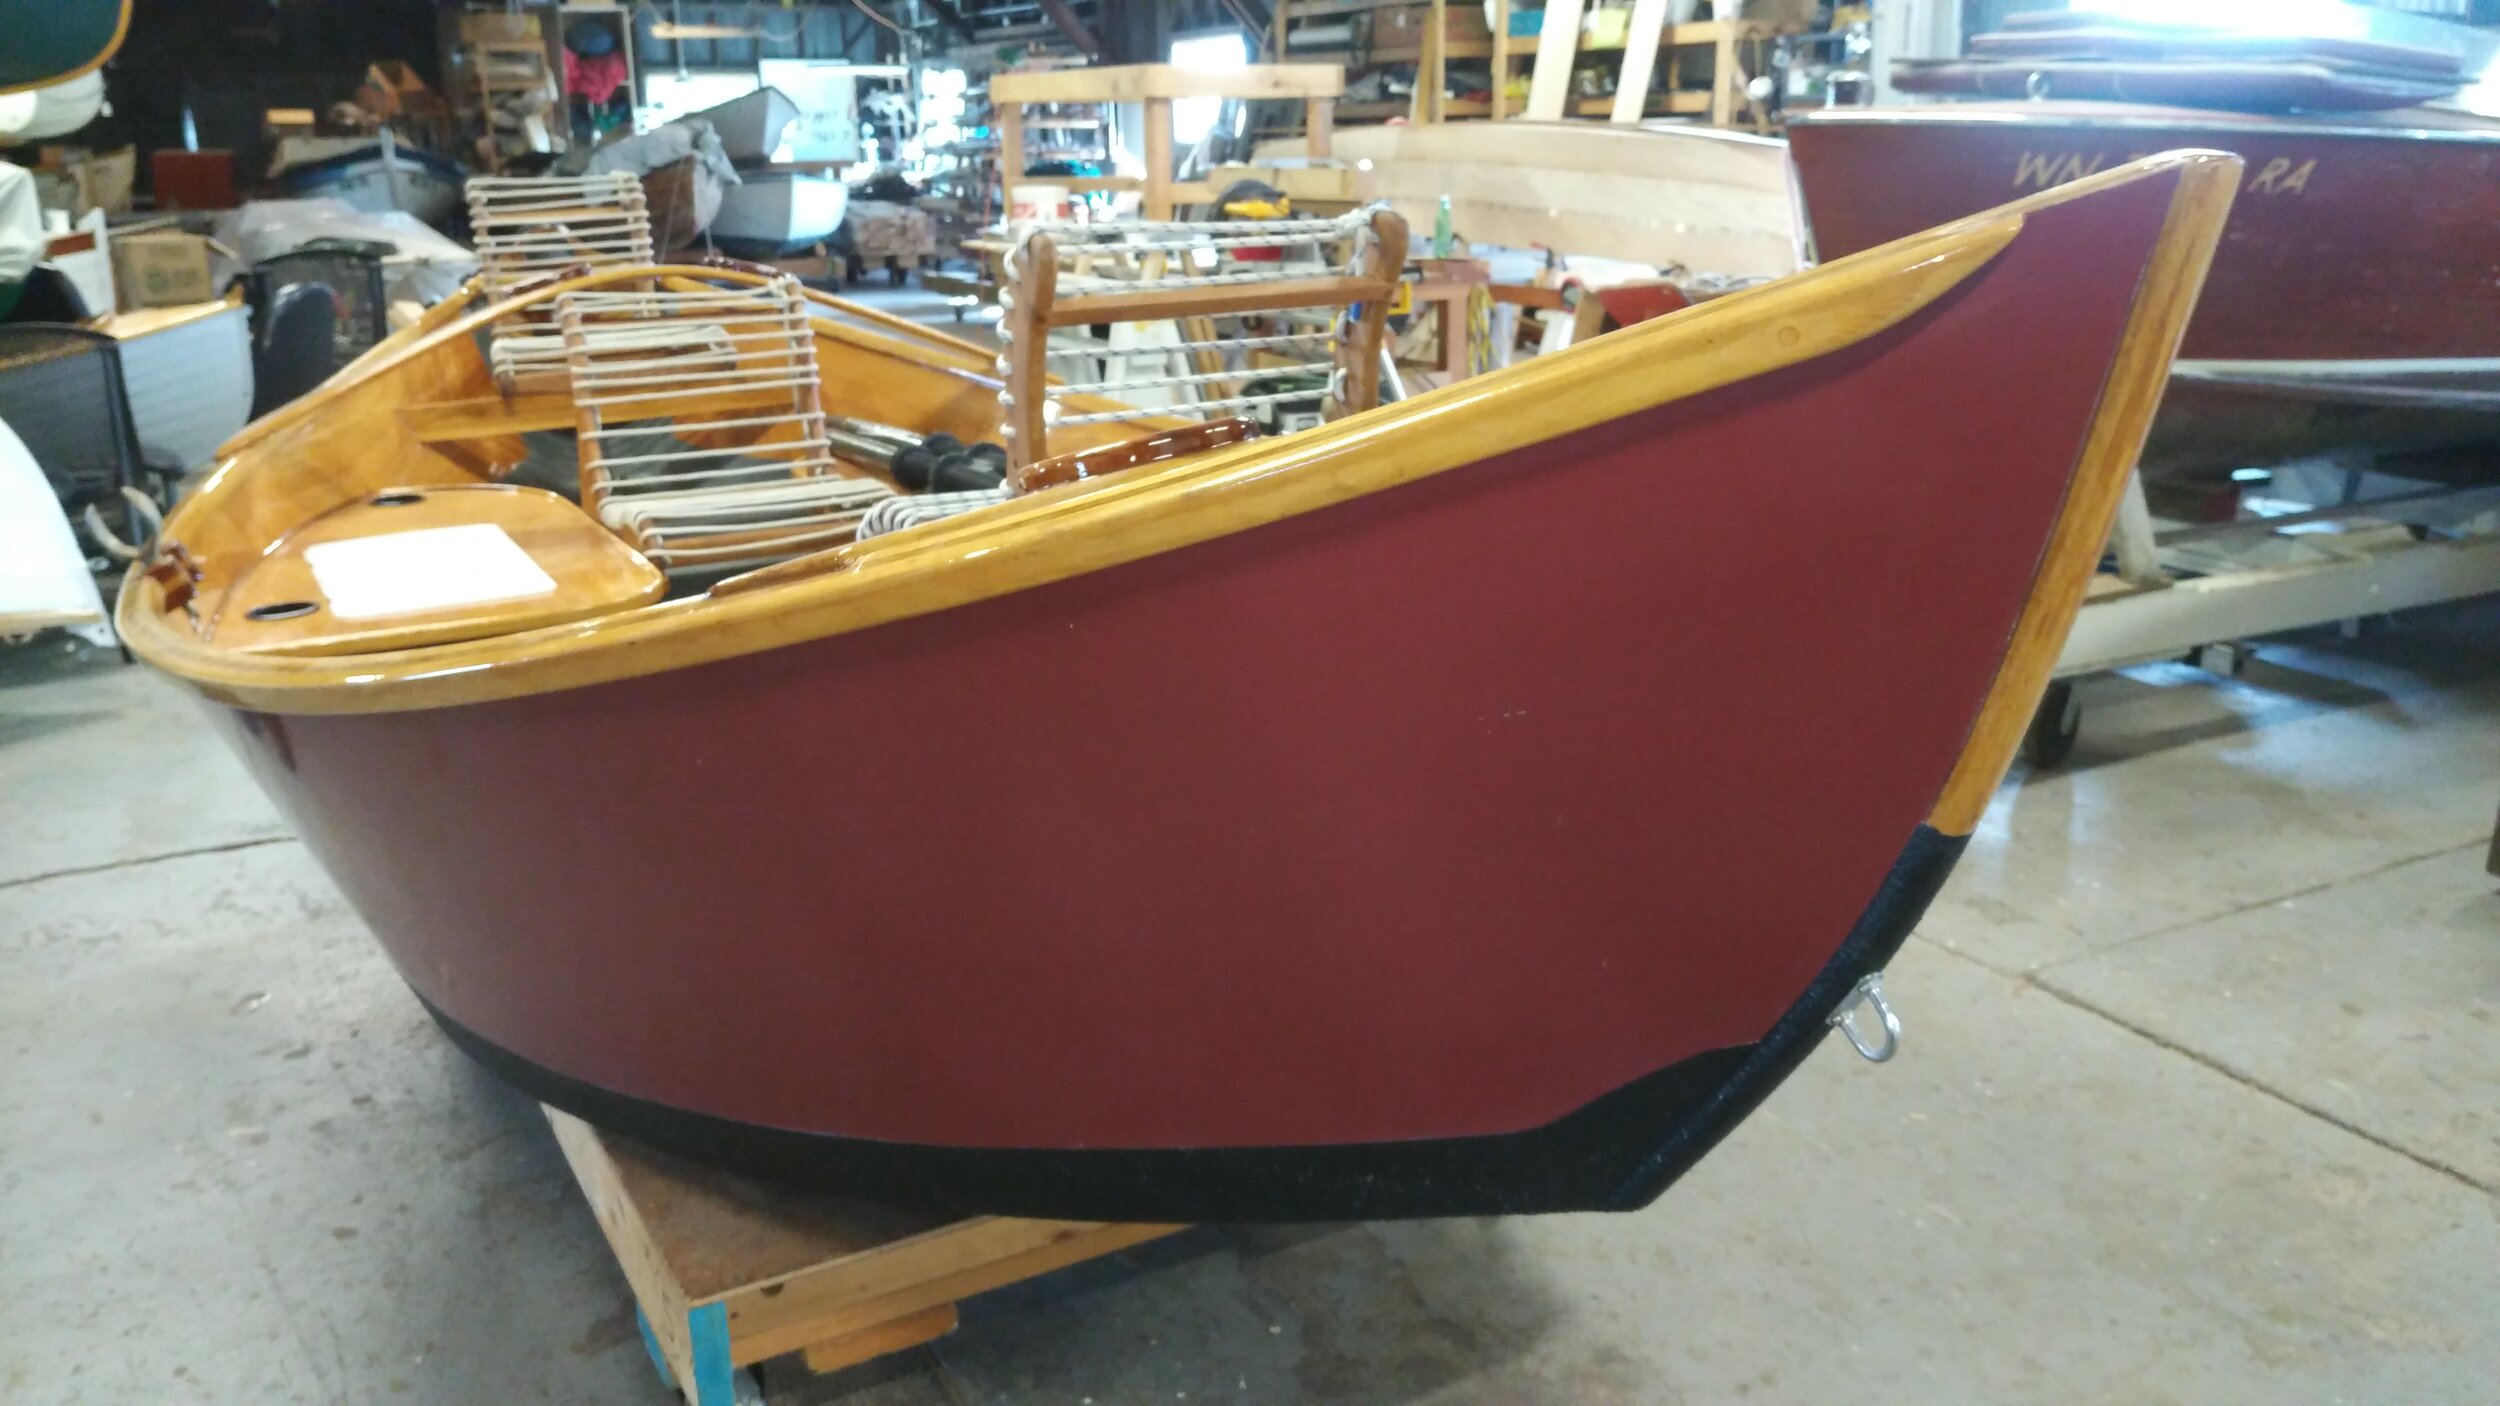 Red Montana drift boat stowed in inside storage